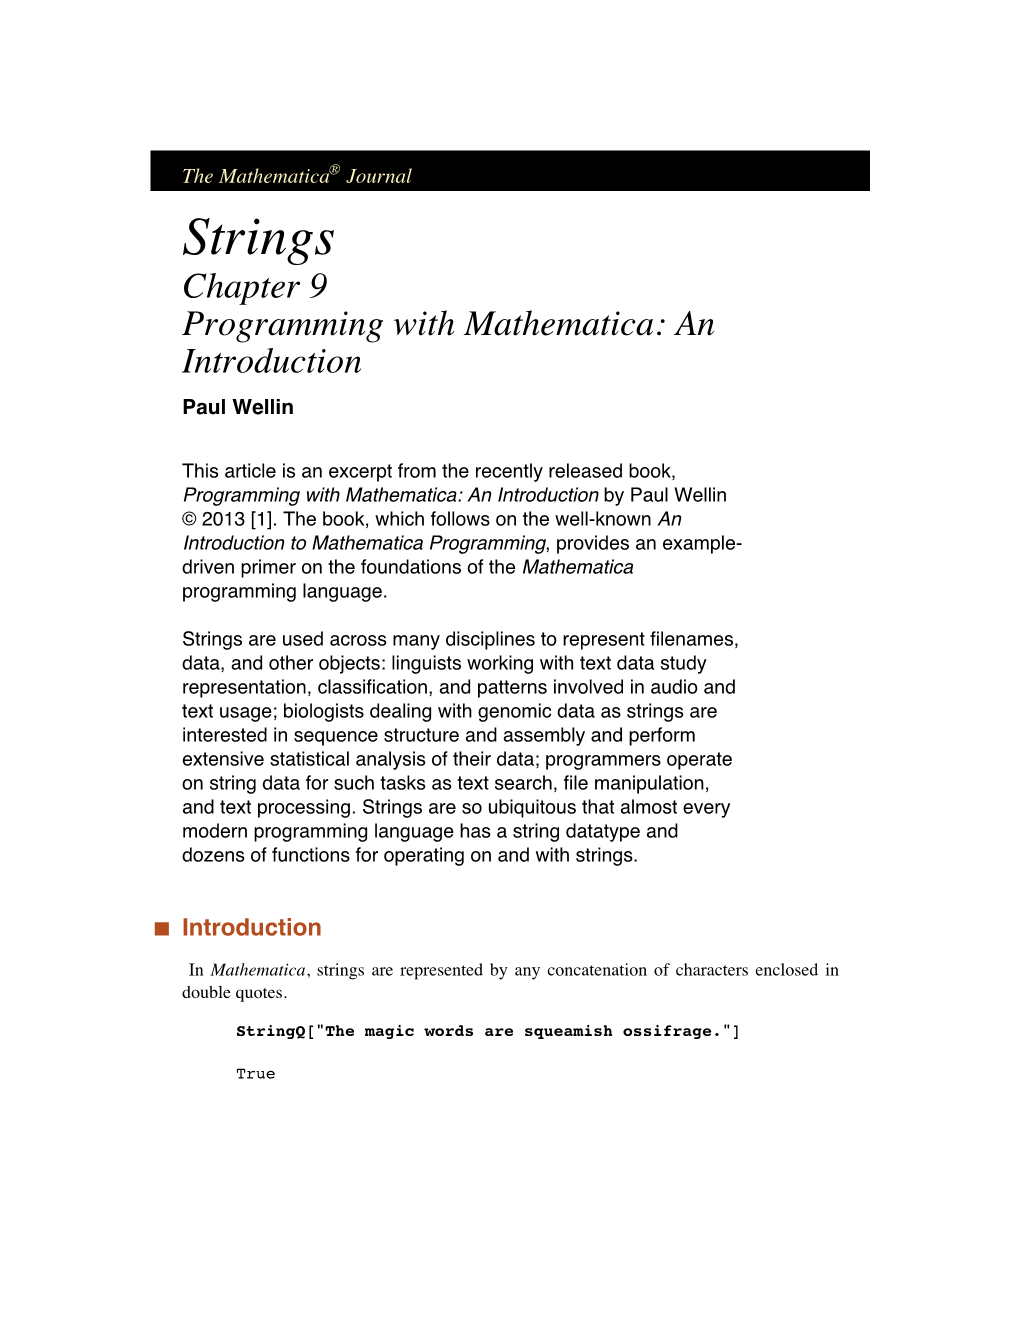 Strings Chapter 9 Programming with Mathematica: an Introduction Paul Wellin